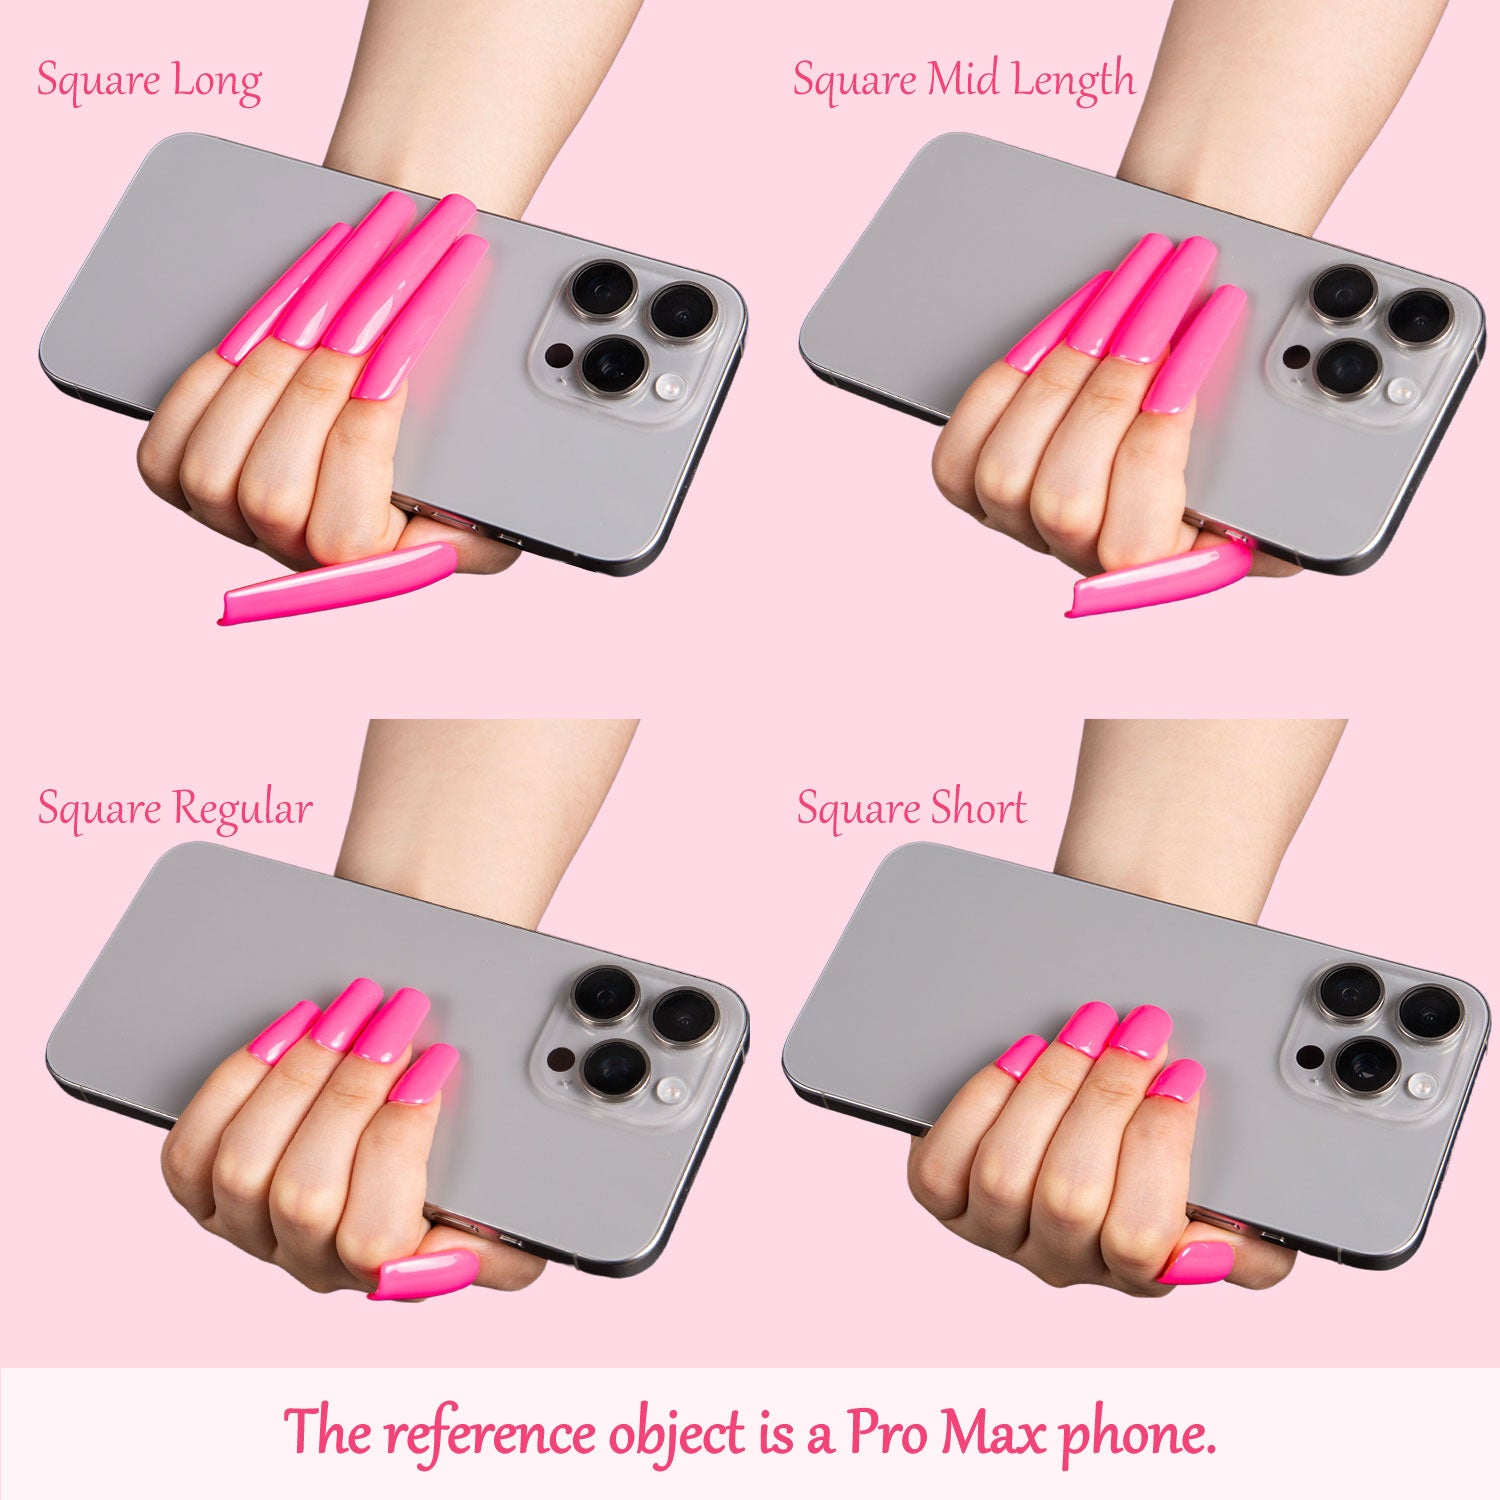 Four variations of square-shaped press-on nails in different lengths (Square Long, Square Mid Length, Square Regular, Square Short) compared against a Pro Max phone.